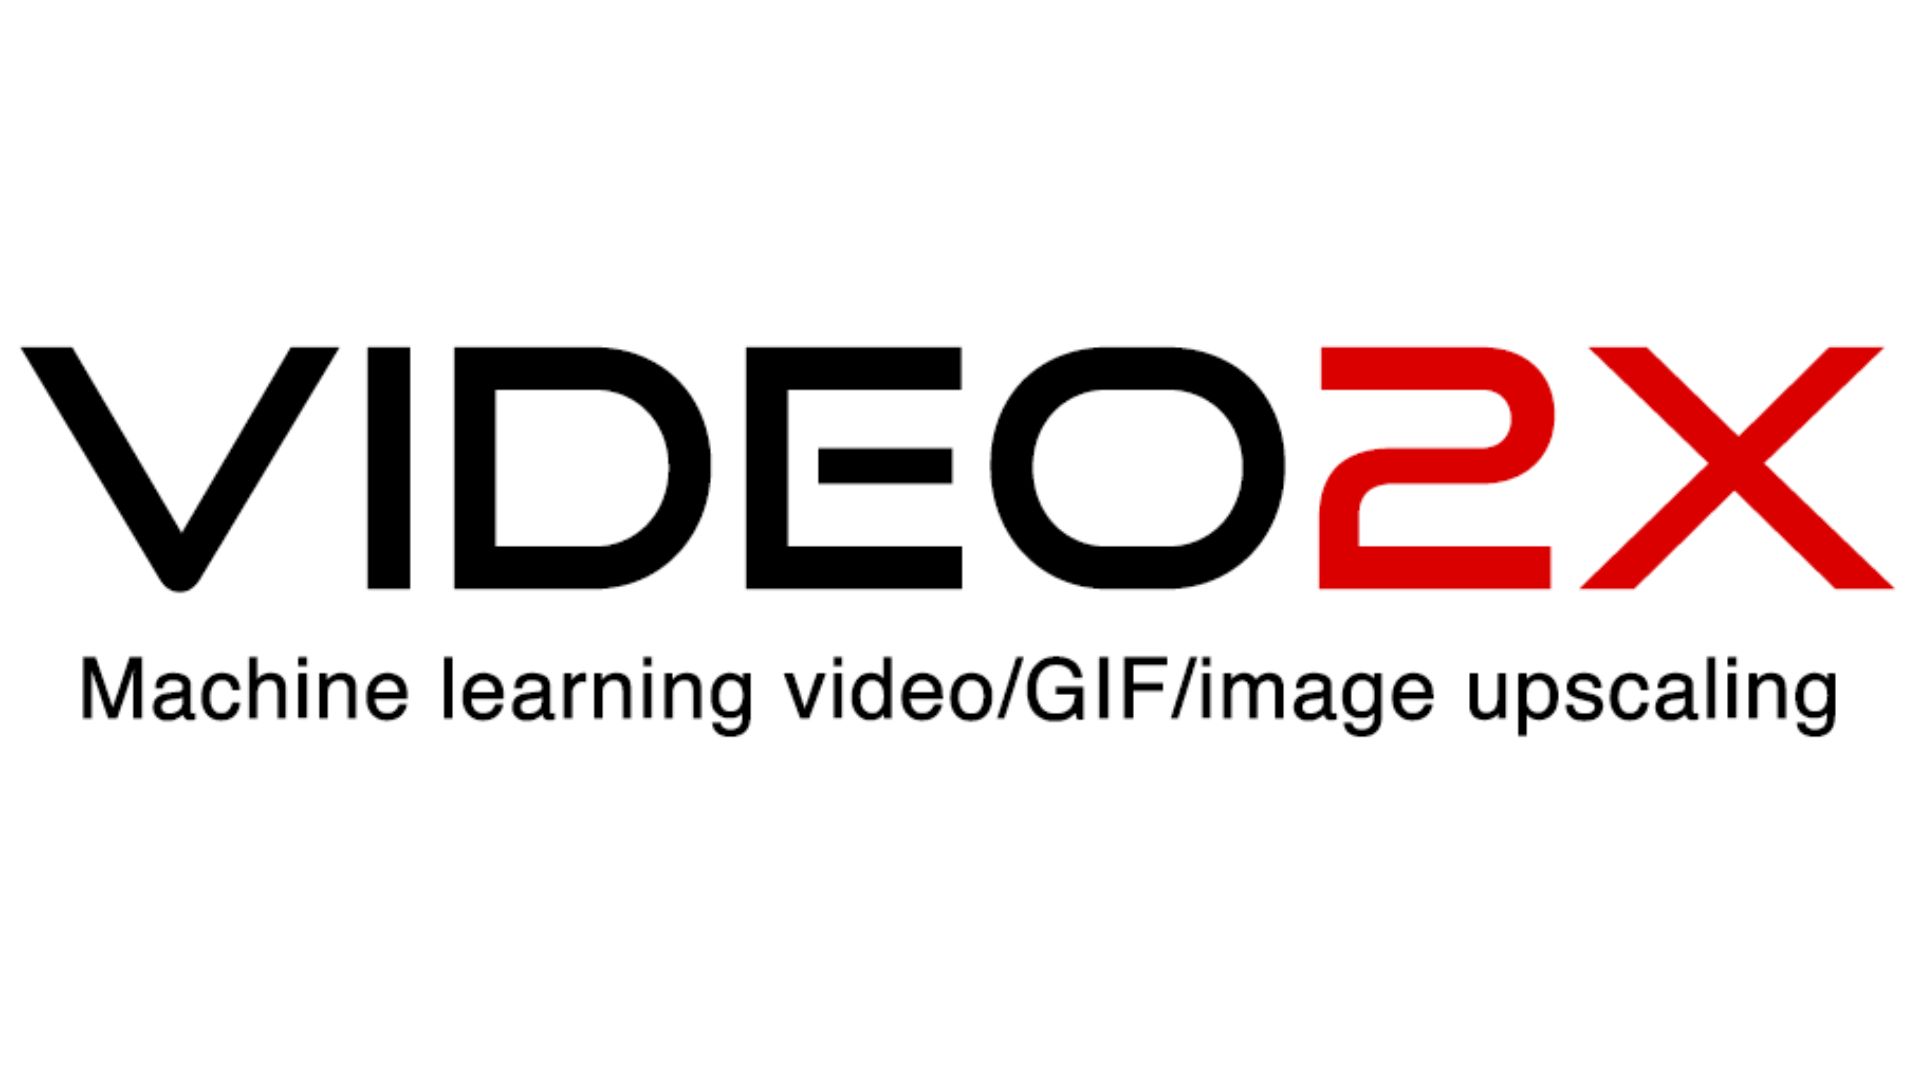 Video2X - Enhancing Video Quality With Deep Learning